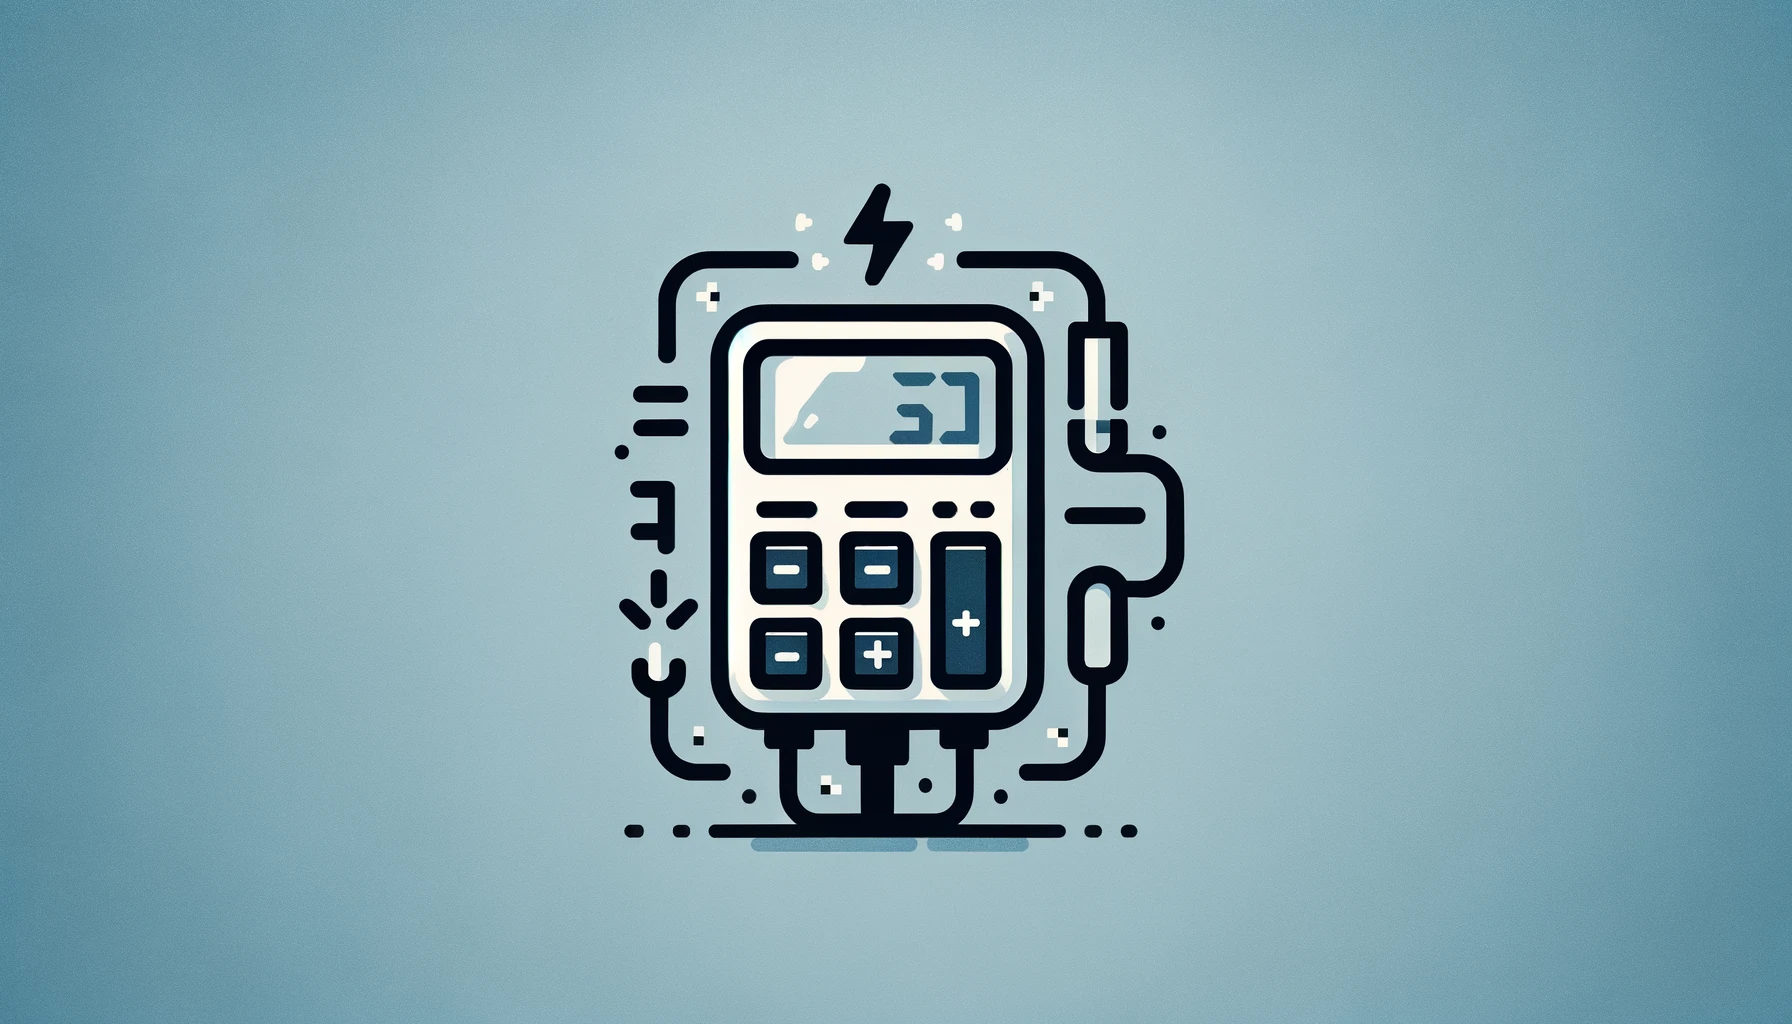 Fusing Current Calculator. The focus should be on basic elements that symbolize electricity.